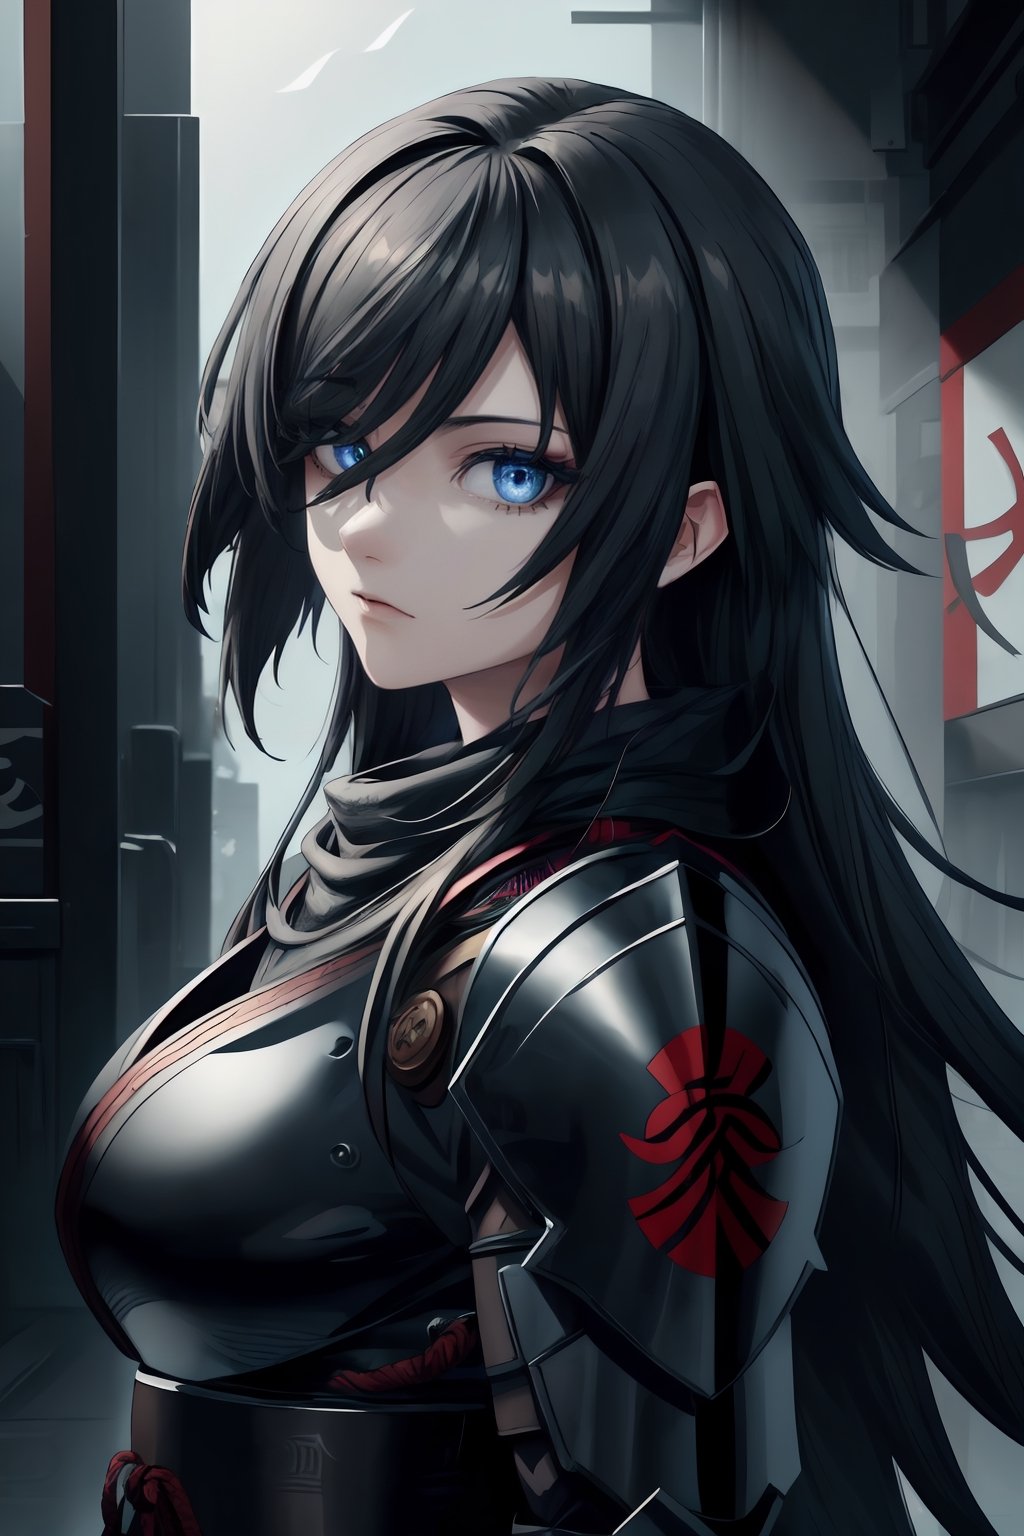 best quality, masterpiece, 1girl,older_female,highres, best quality, masterpiece, 1girl,highres,older_female,solo, blue_eyes,detailed blue eyes,scary gaze,sidelocks, closed_mouth, upper_body,hollow eyes,eyelashes, long black hair,hair_over_eye,hair over one eye,Shinobi,japanese armor,viewed_from_side,looking_at_viewer,looking to the side,yui,noir